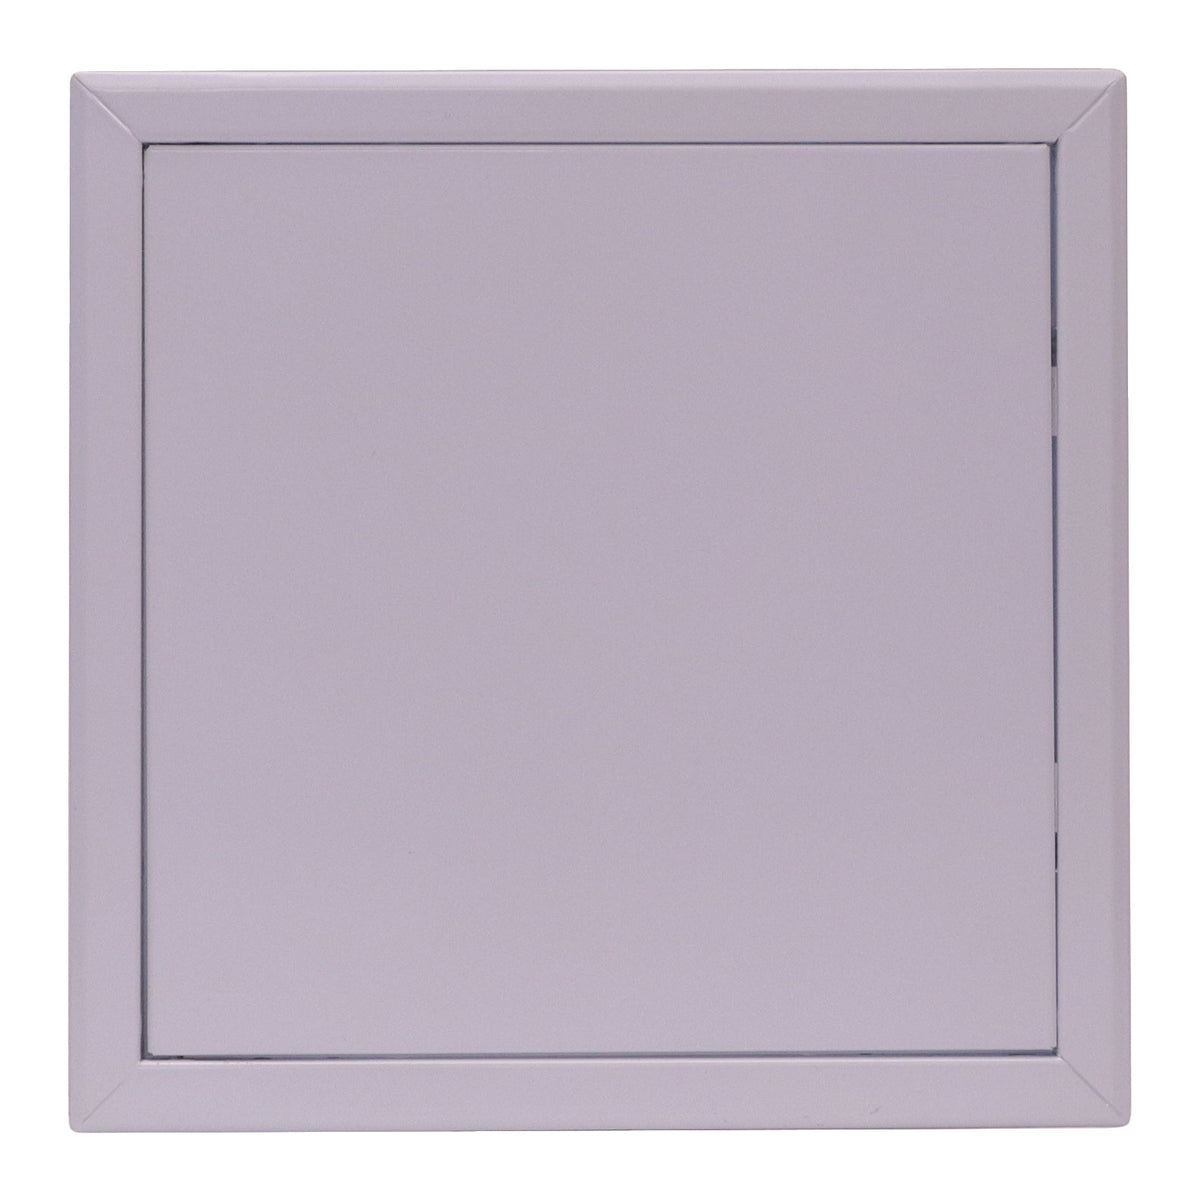 12&quot; X 12&quot; Universal Aluminum Access Panel Door For Wall / Ceiling Application (Push-Lock) With Solid Frame - [Outer Dimensions: 13&quot; Width X 13&quot; Height]